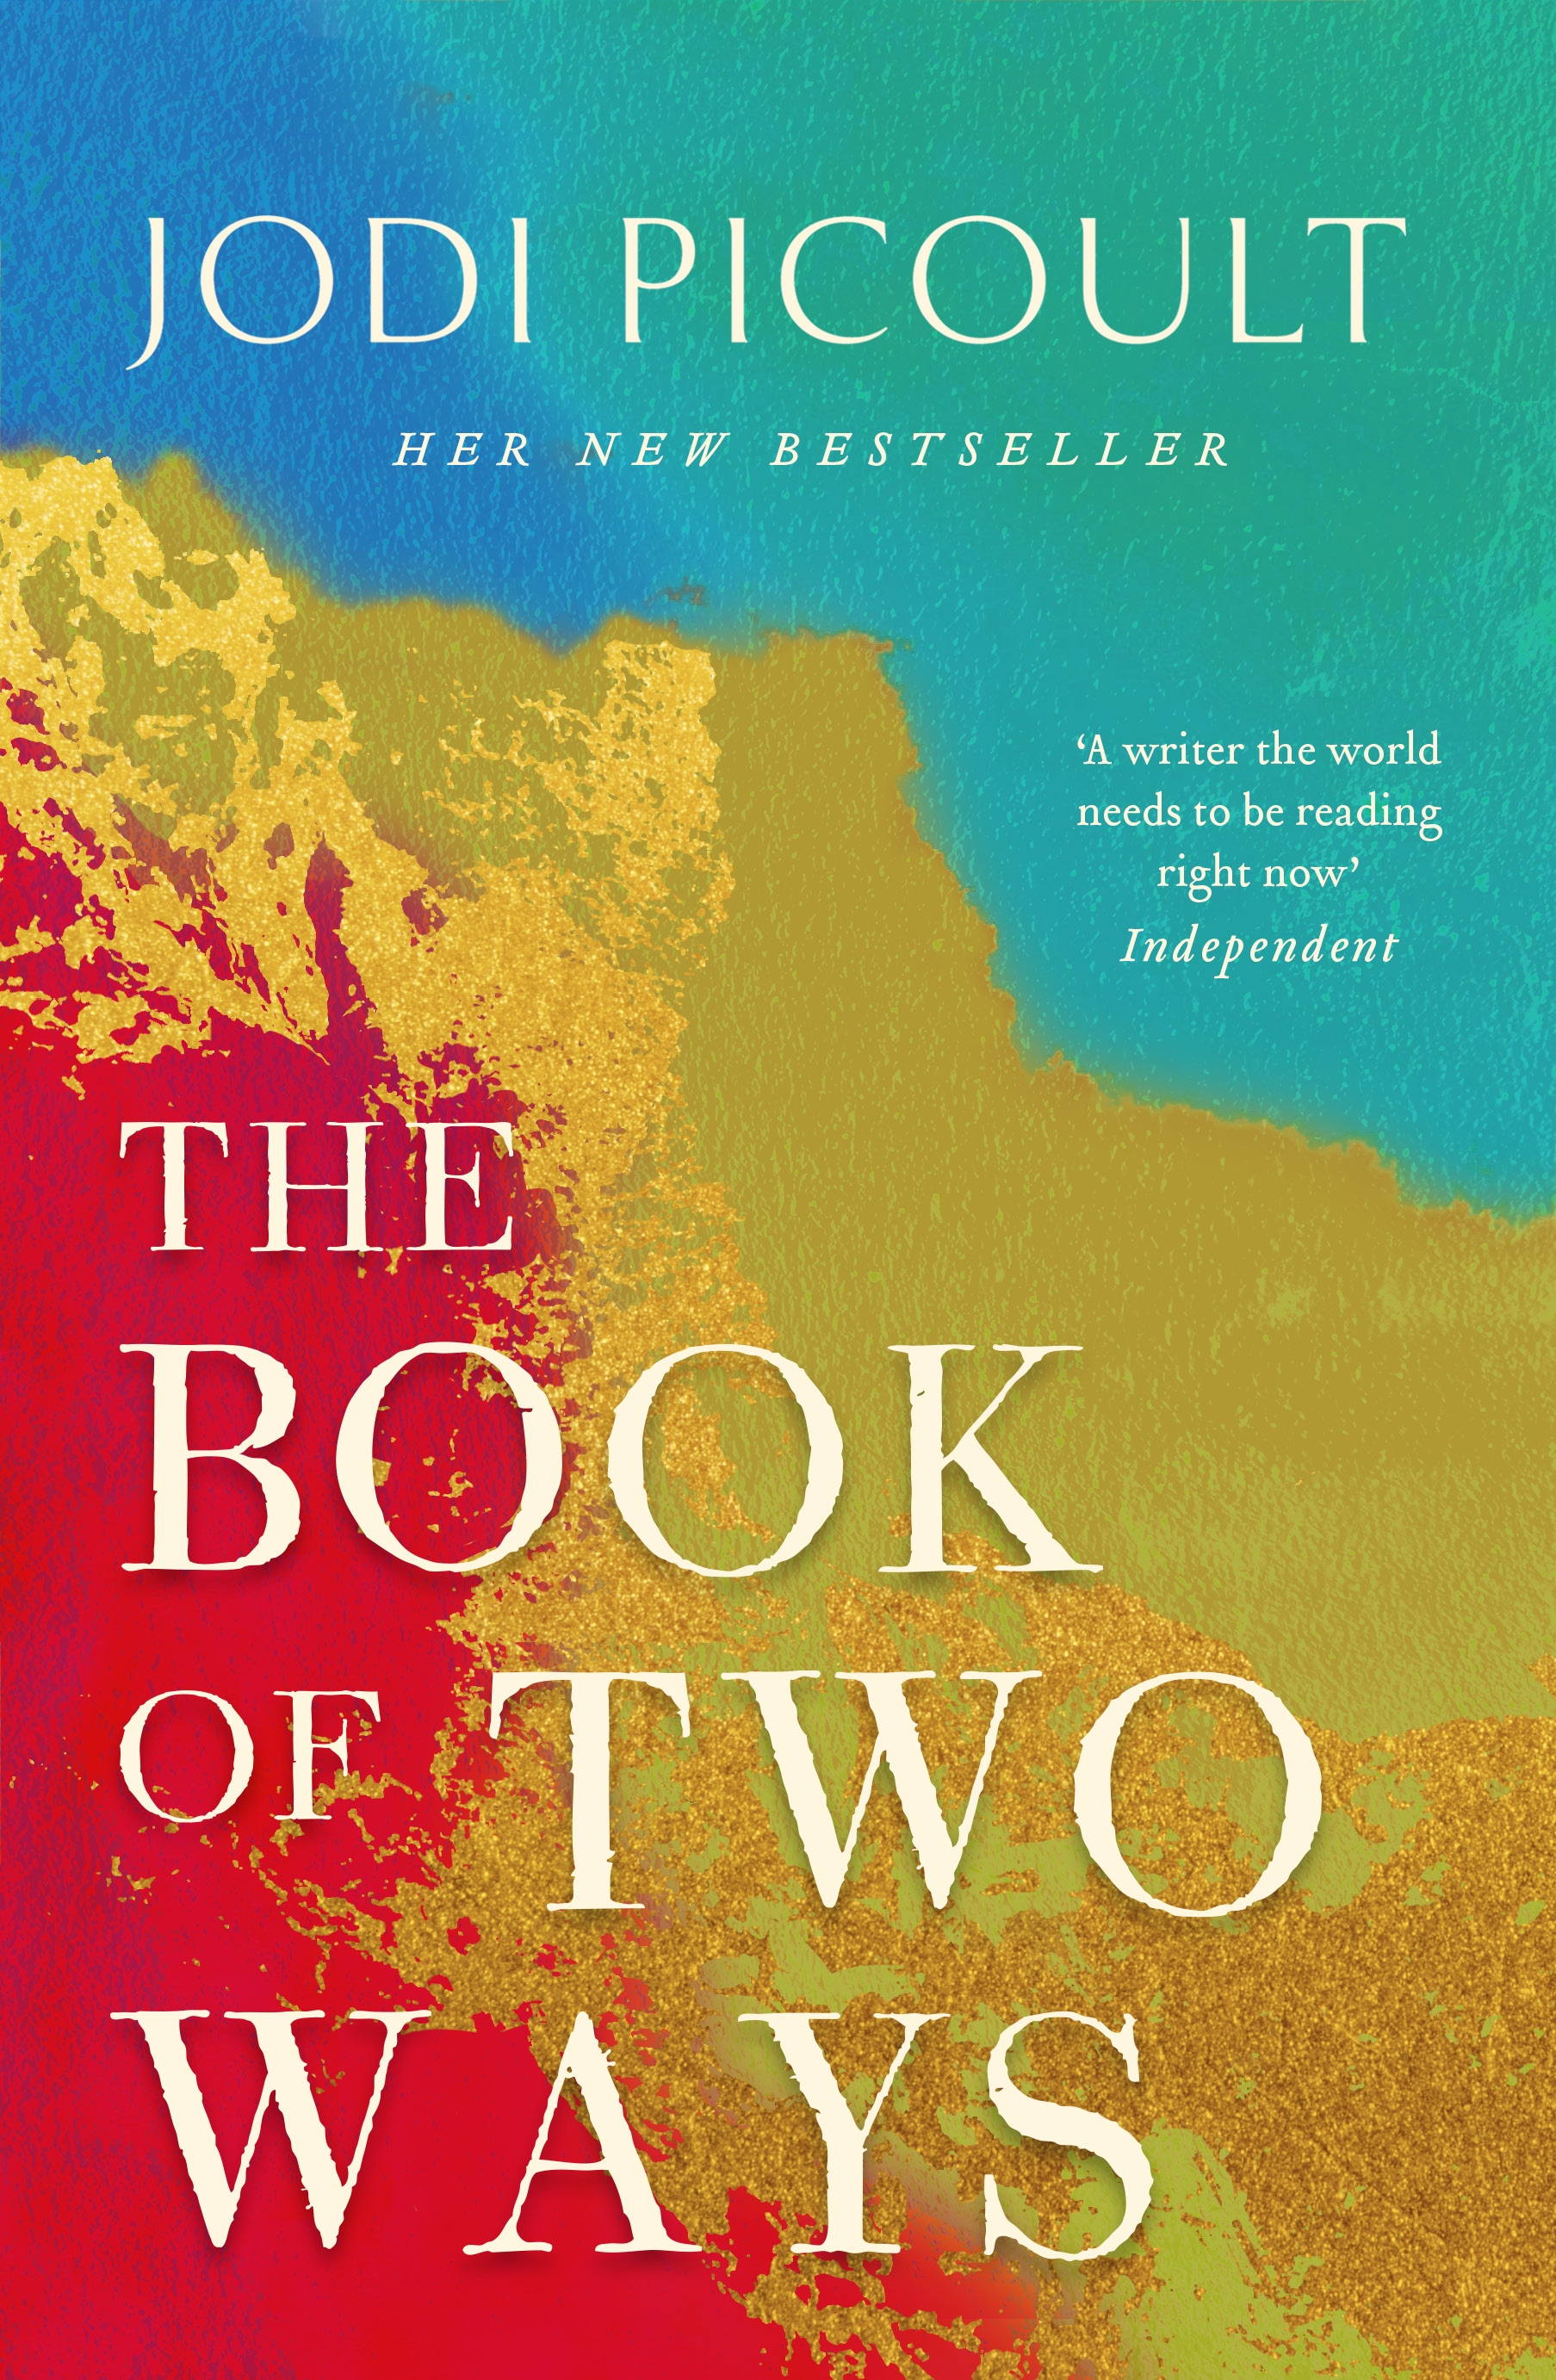 The book of twos